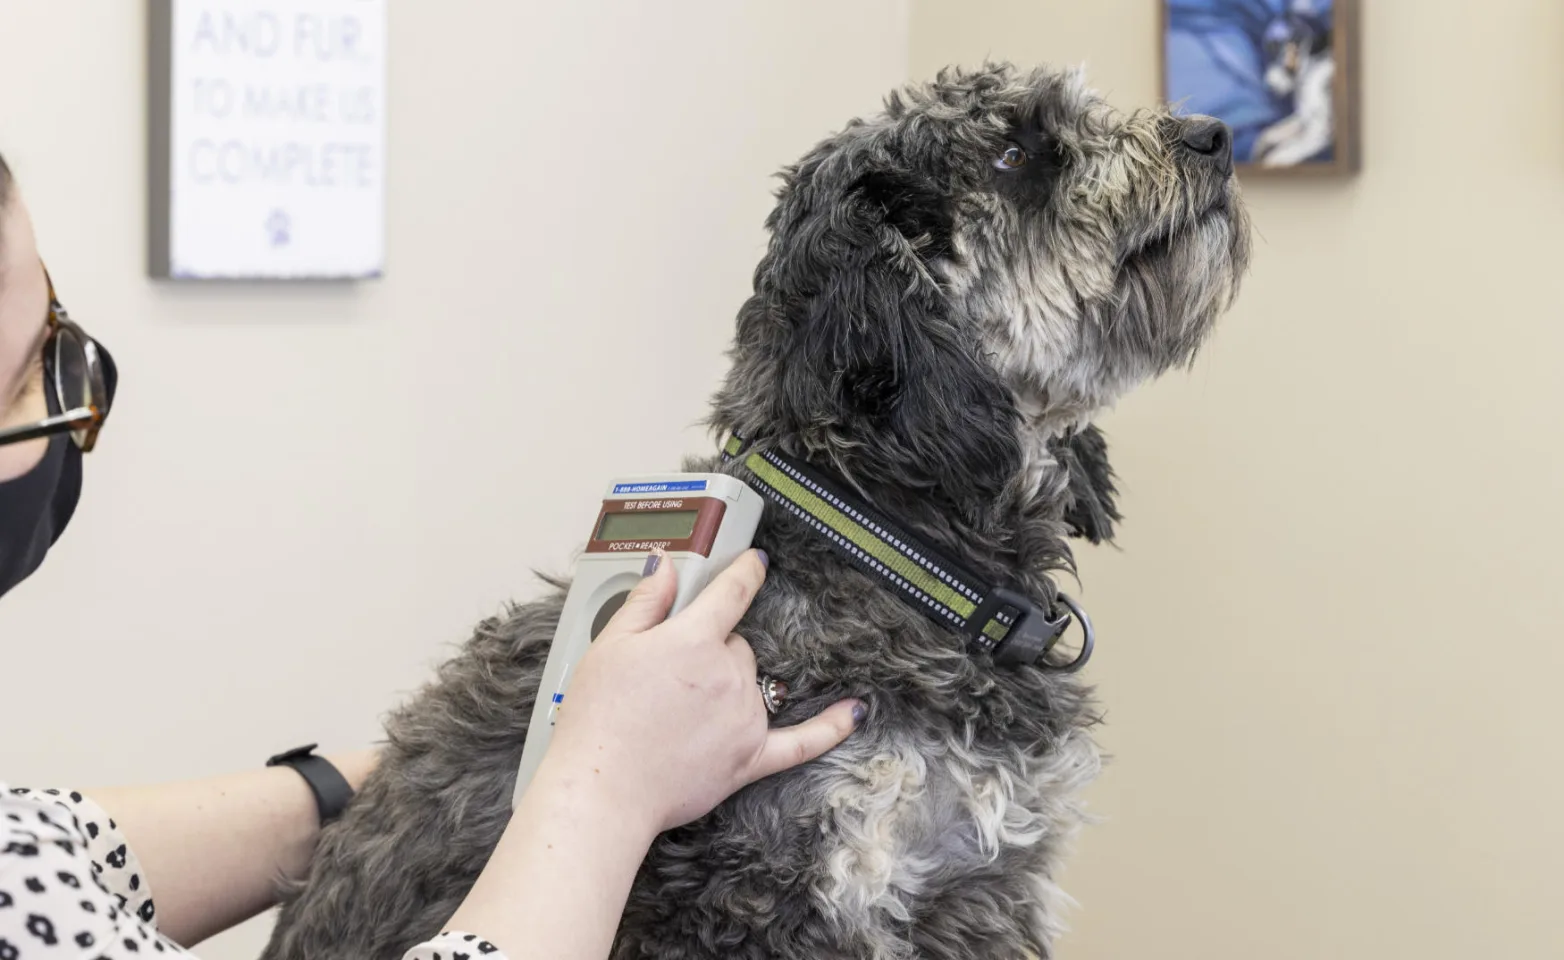 Dog with microchip scanner